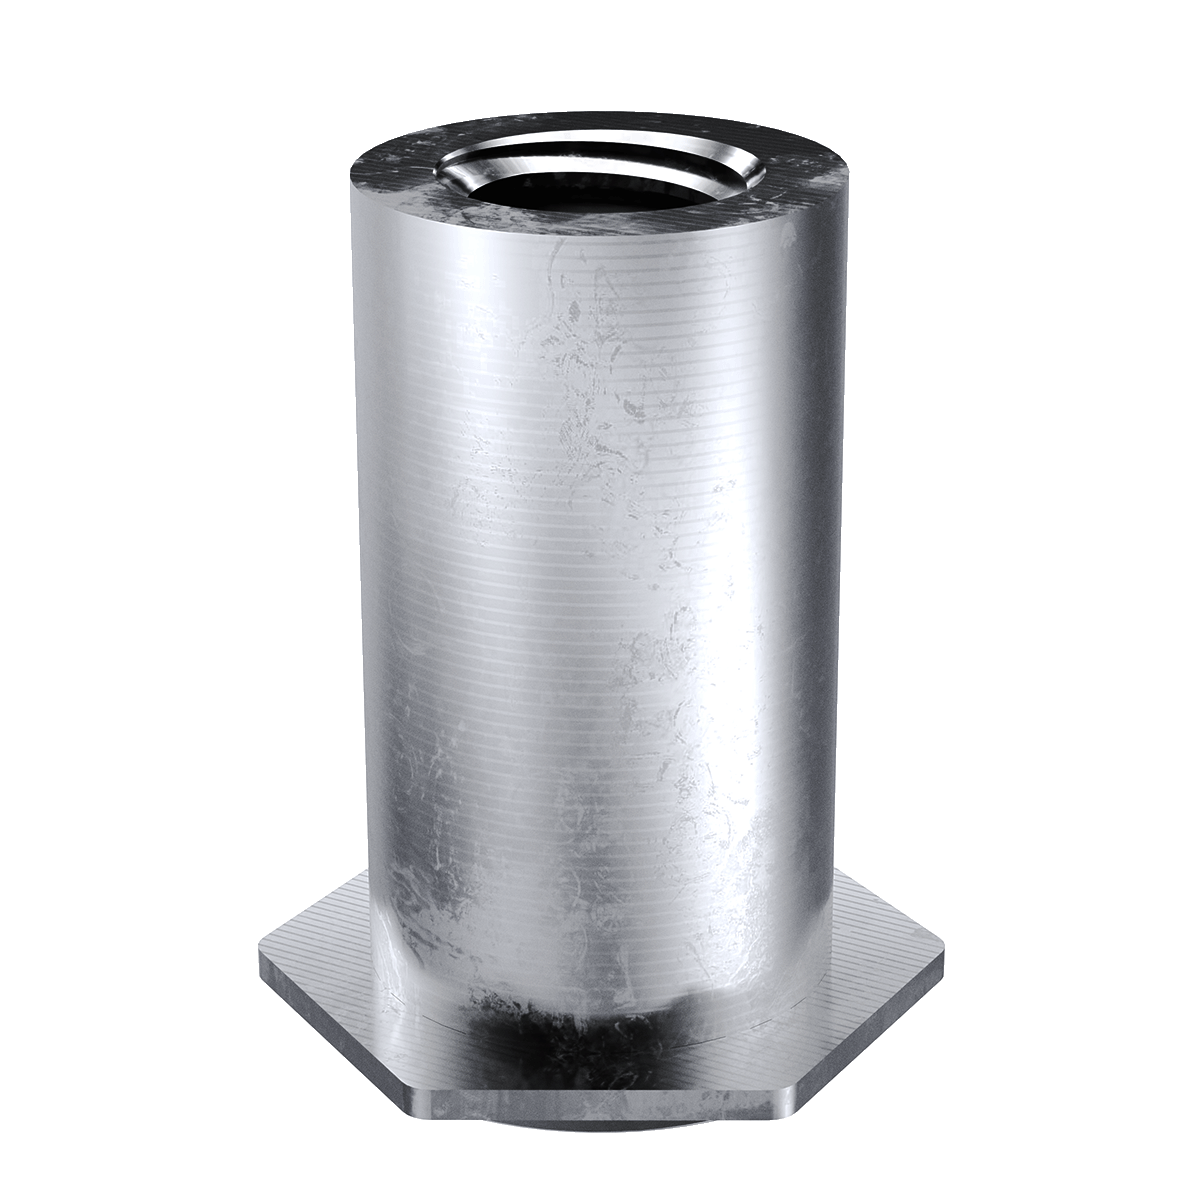 Self-Clinching Standoff, Concealed Head, 300 Series Stainless Steel, Passivated, 4-40 x 0.500, Sheet Thick.: 0.062, 100 Pack